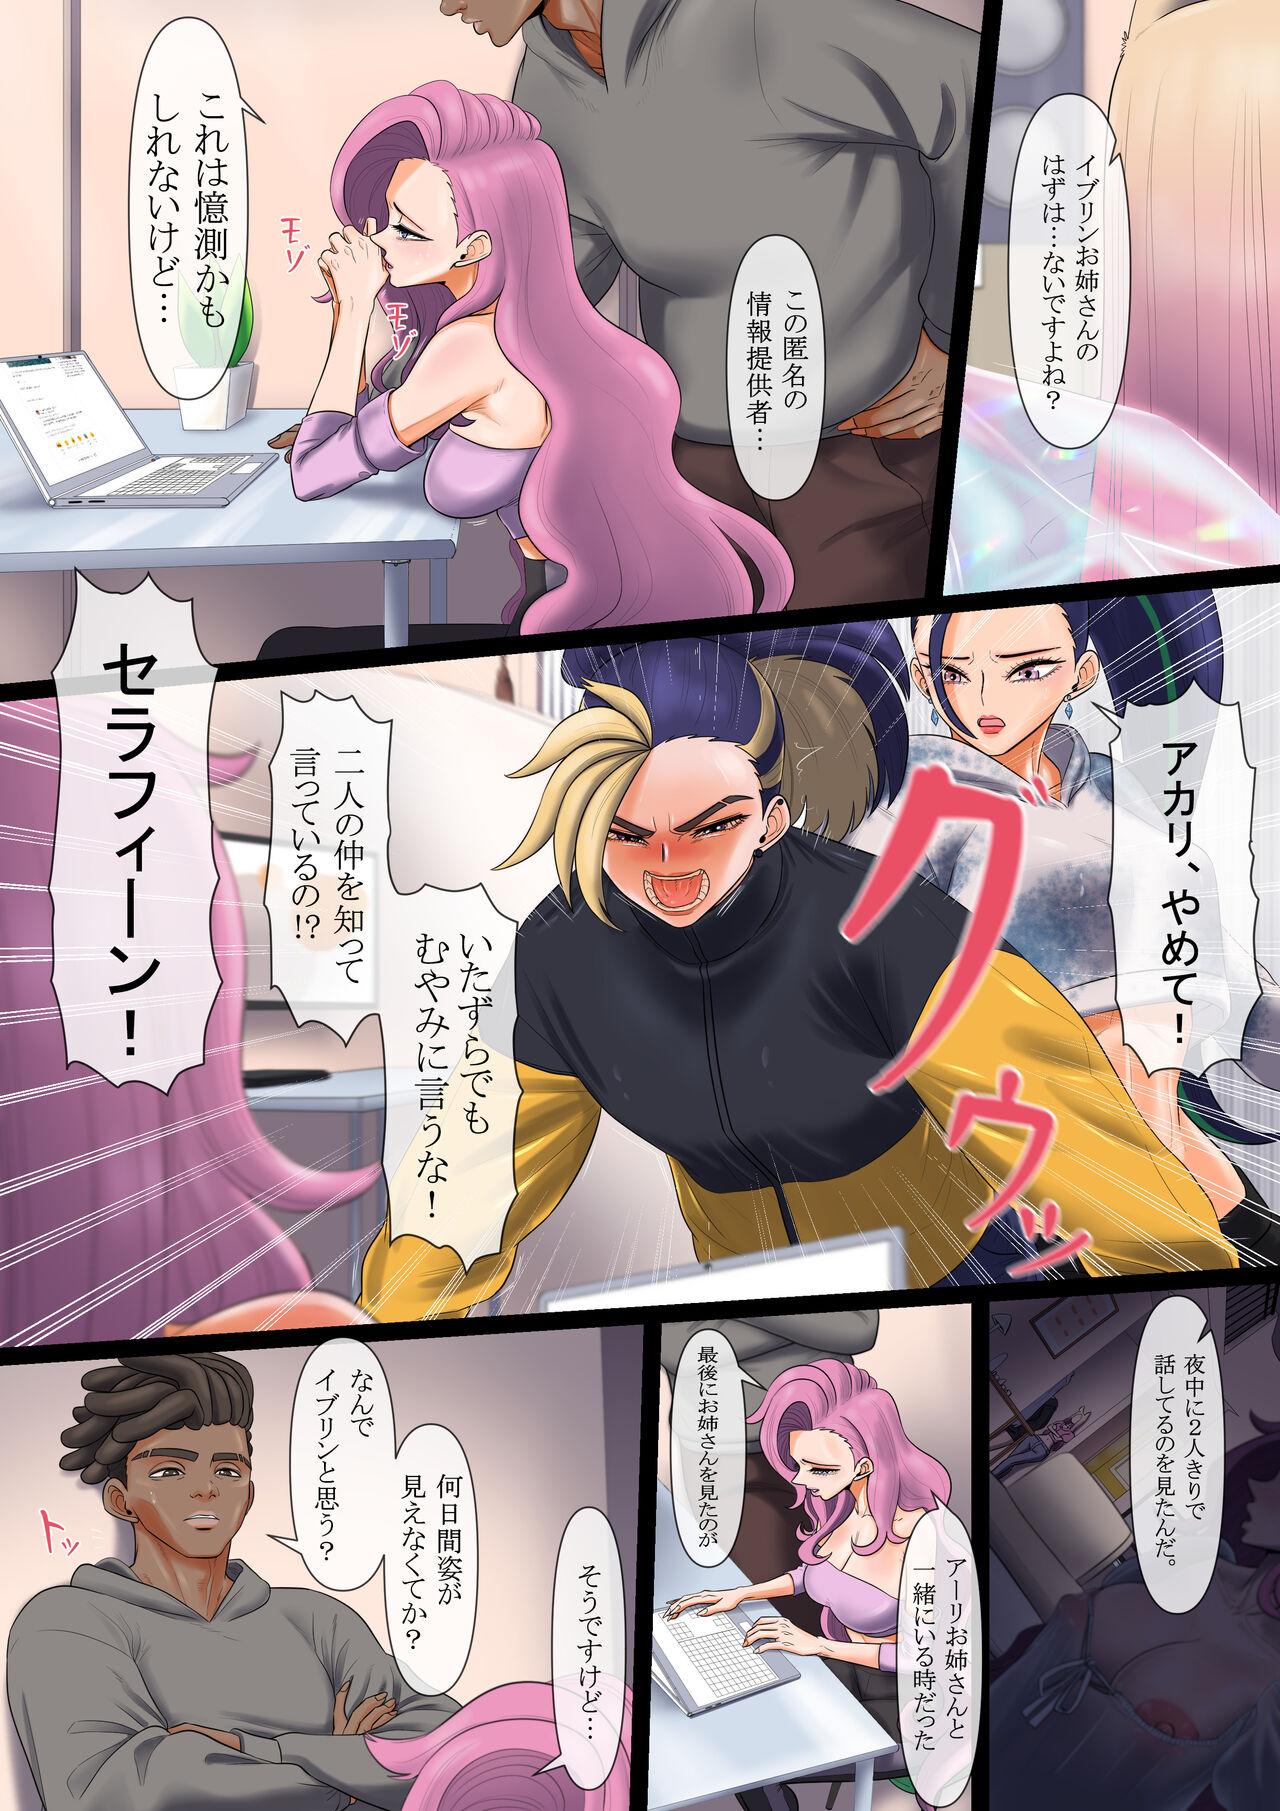 Pussyfucking 守りたいもの... - League of legends Made - Page 3